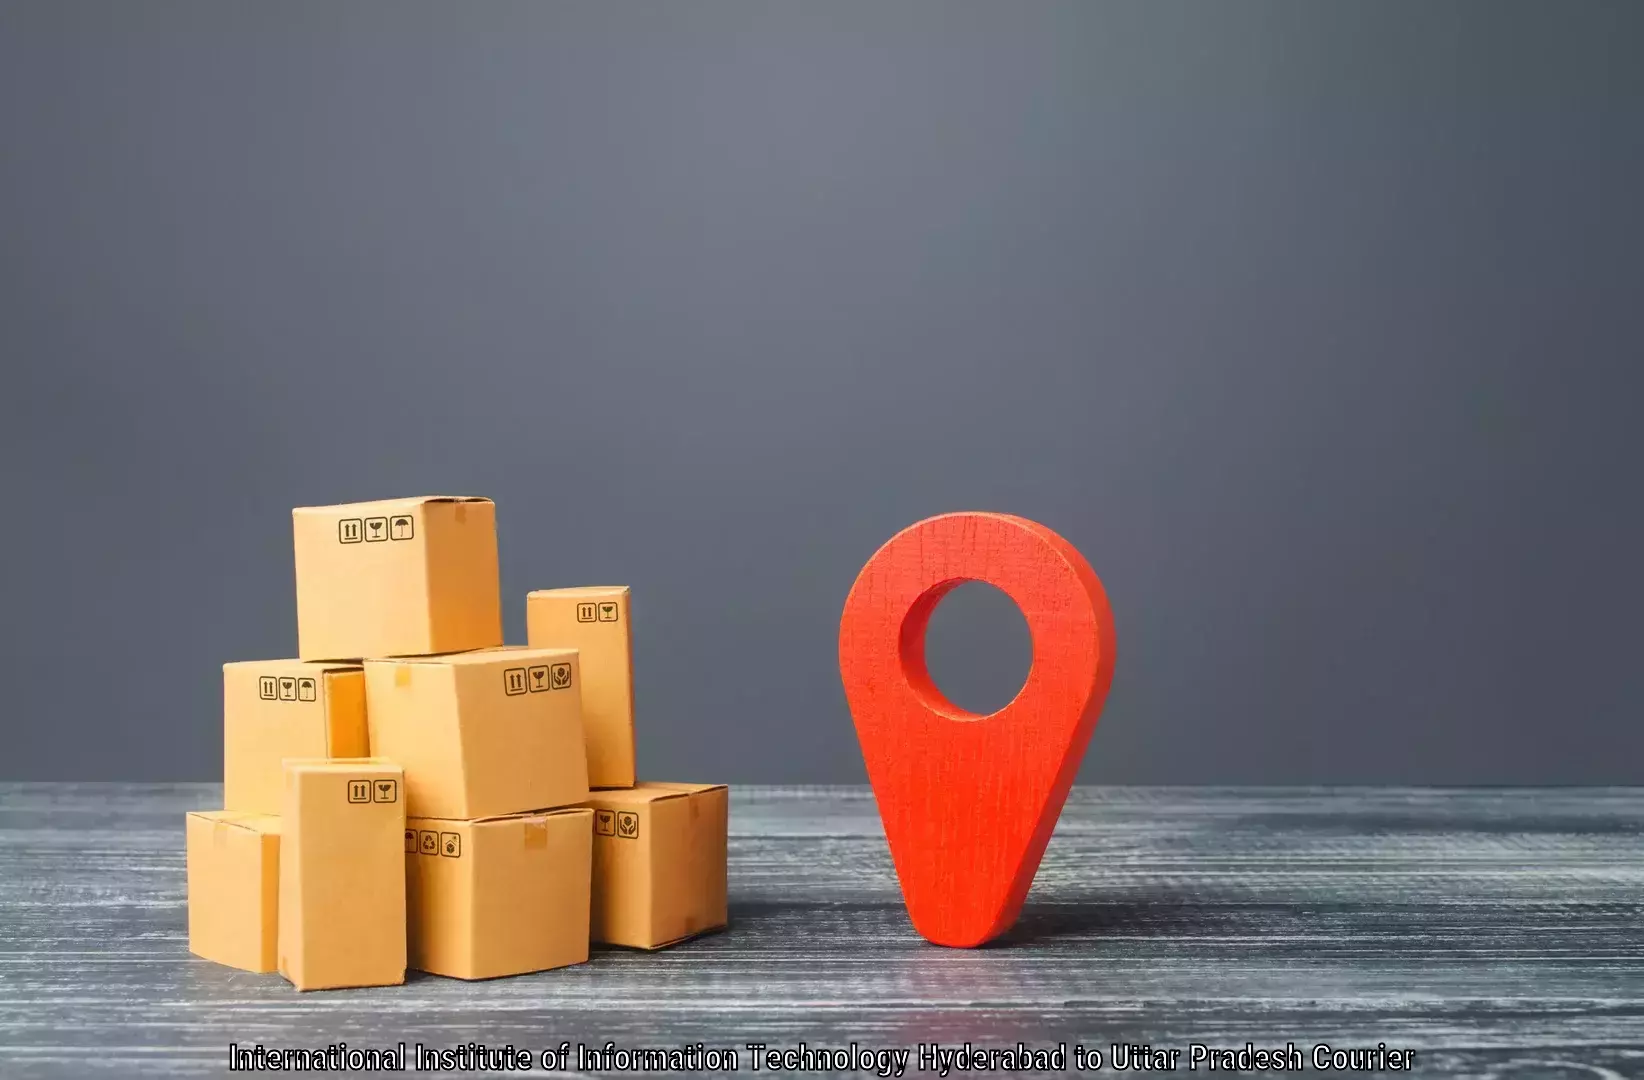 Comprehensive parcel tracking International Institute of Information Technology Hyderabad to Anupshahar